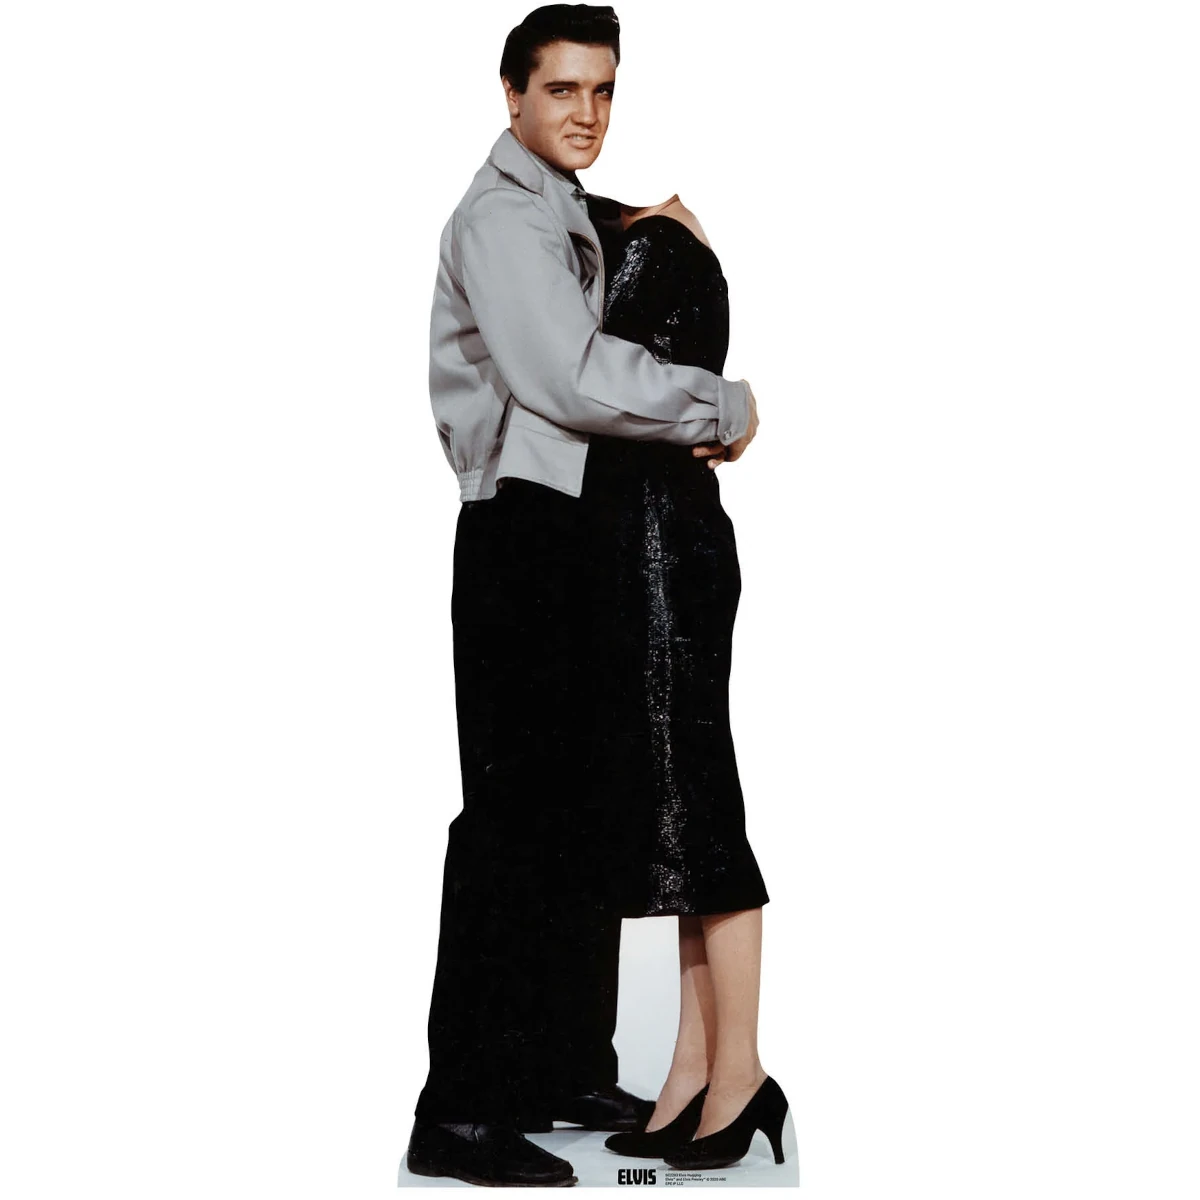 SC2203 Elvis Presley 'Standing Hugging' Official Stand-In Lifesize Cardboard Cutout Standee Front